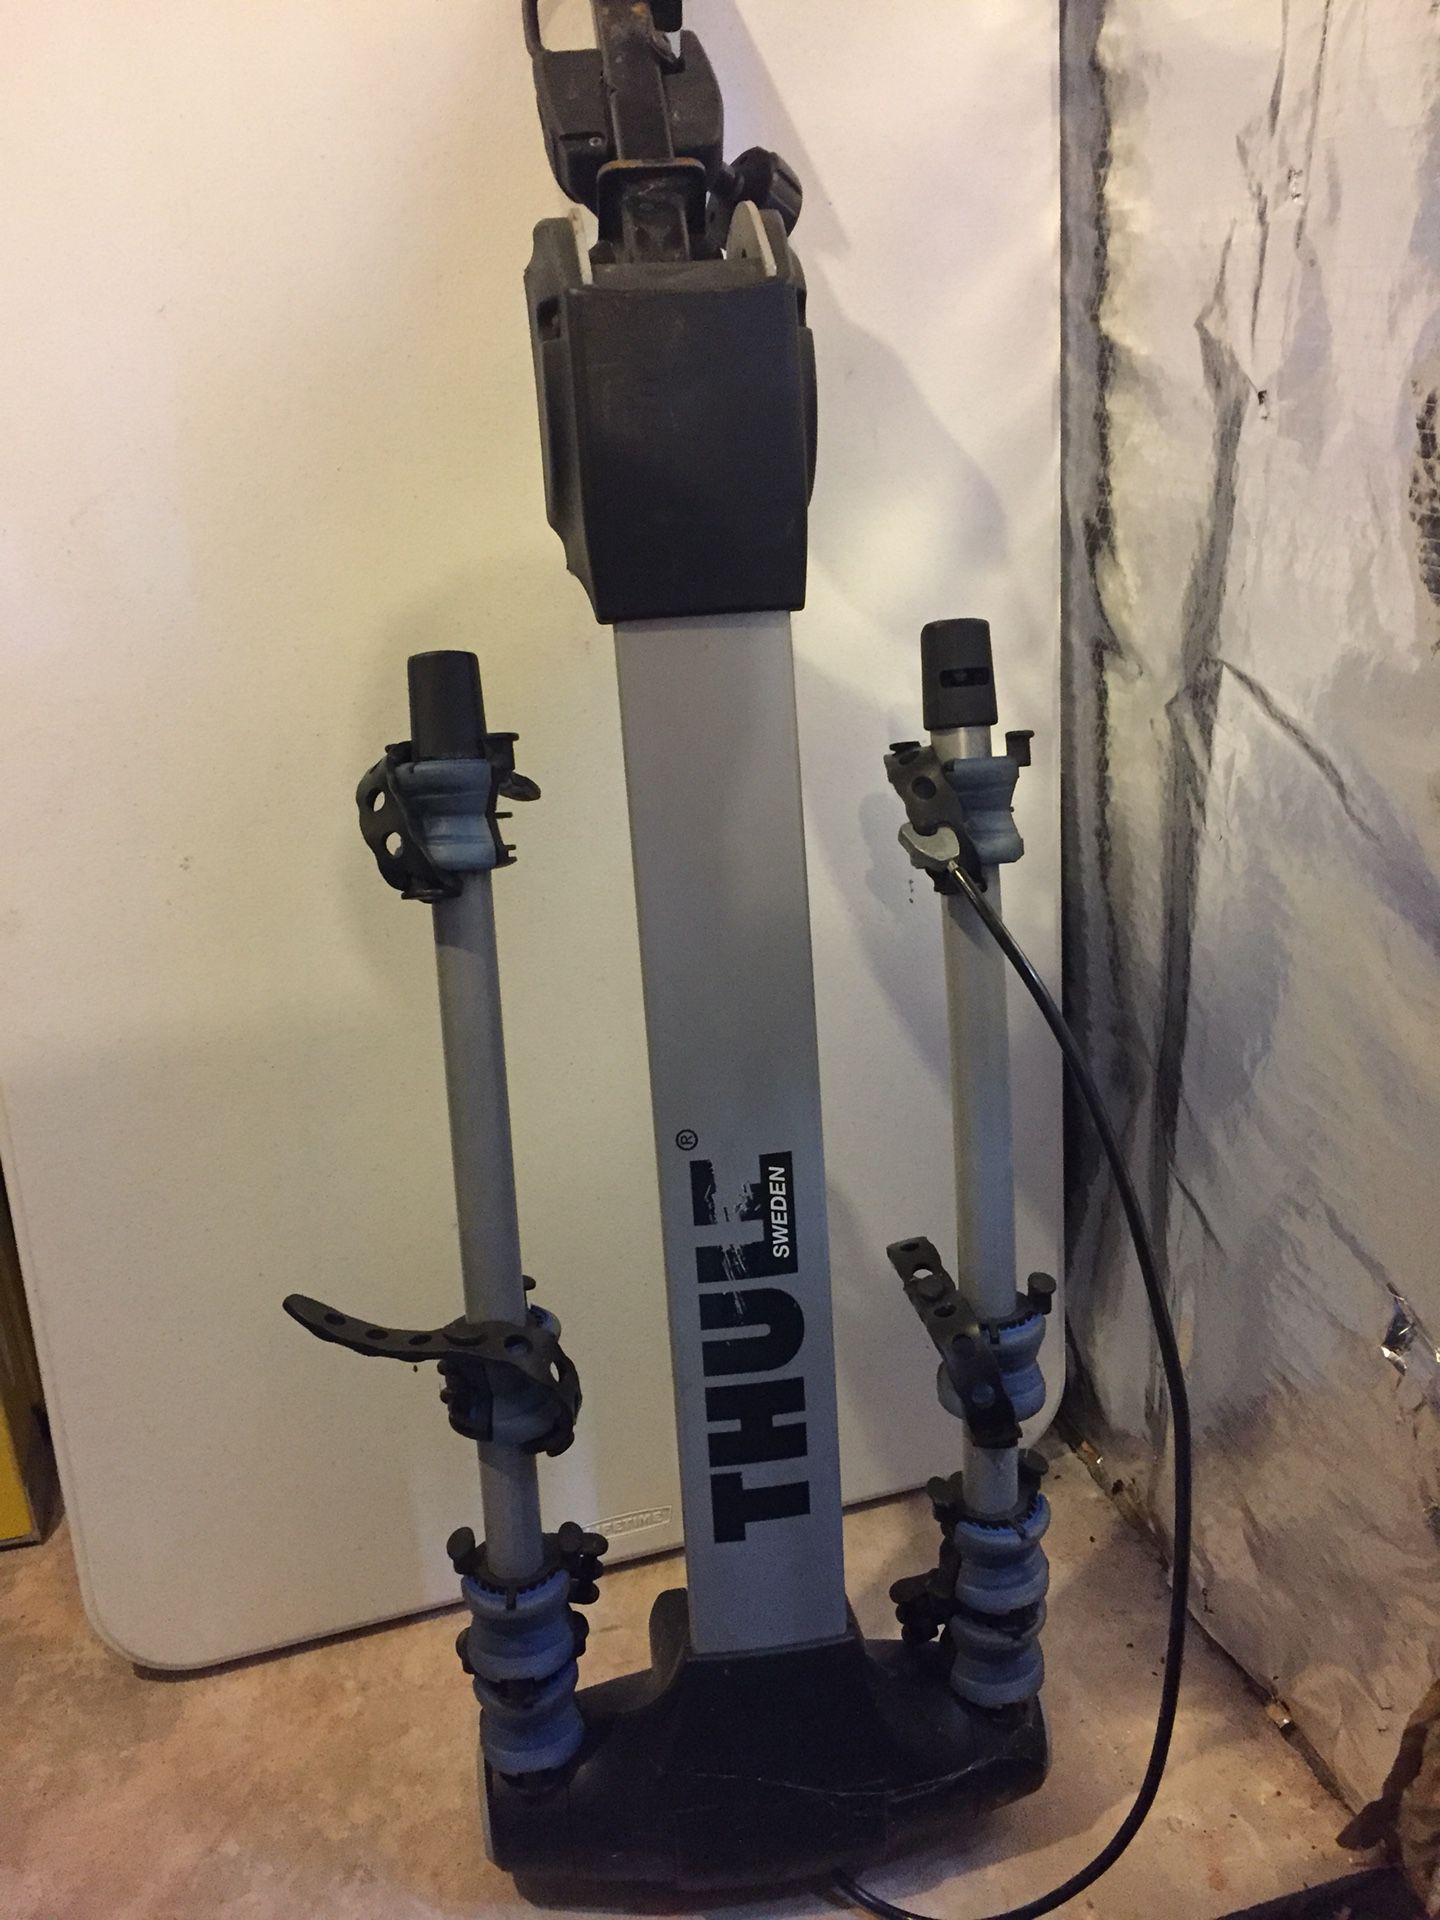 Thule Bike Rack,holds 4 bikes, theft proof lock for bike mount and bikes. All pieces included excellent condition, easily folds up and down for easy